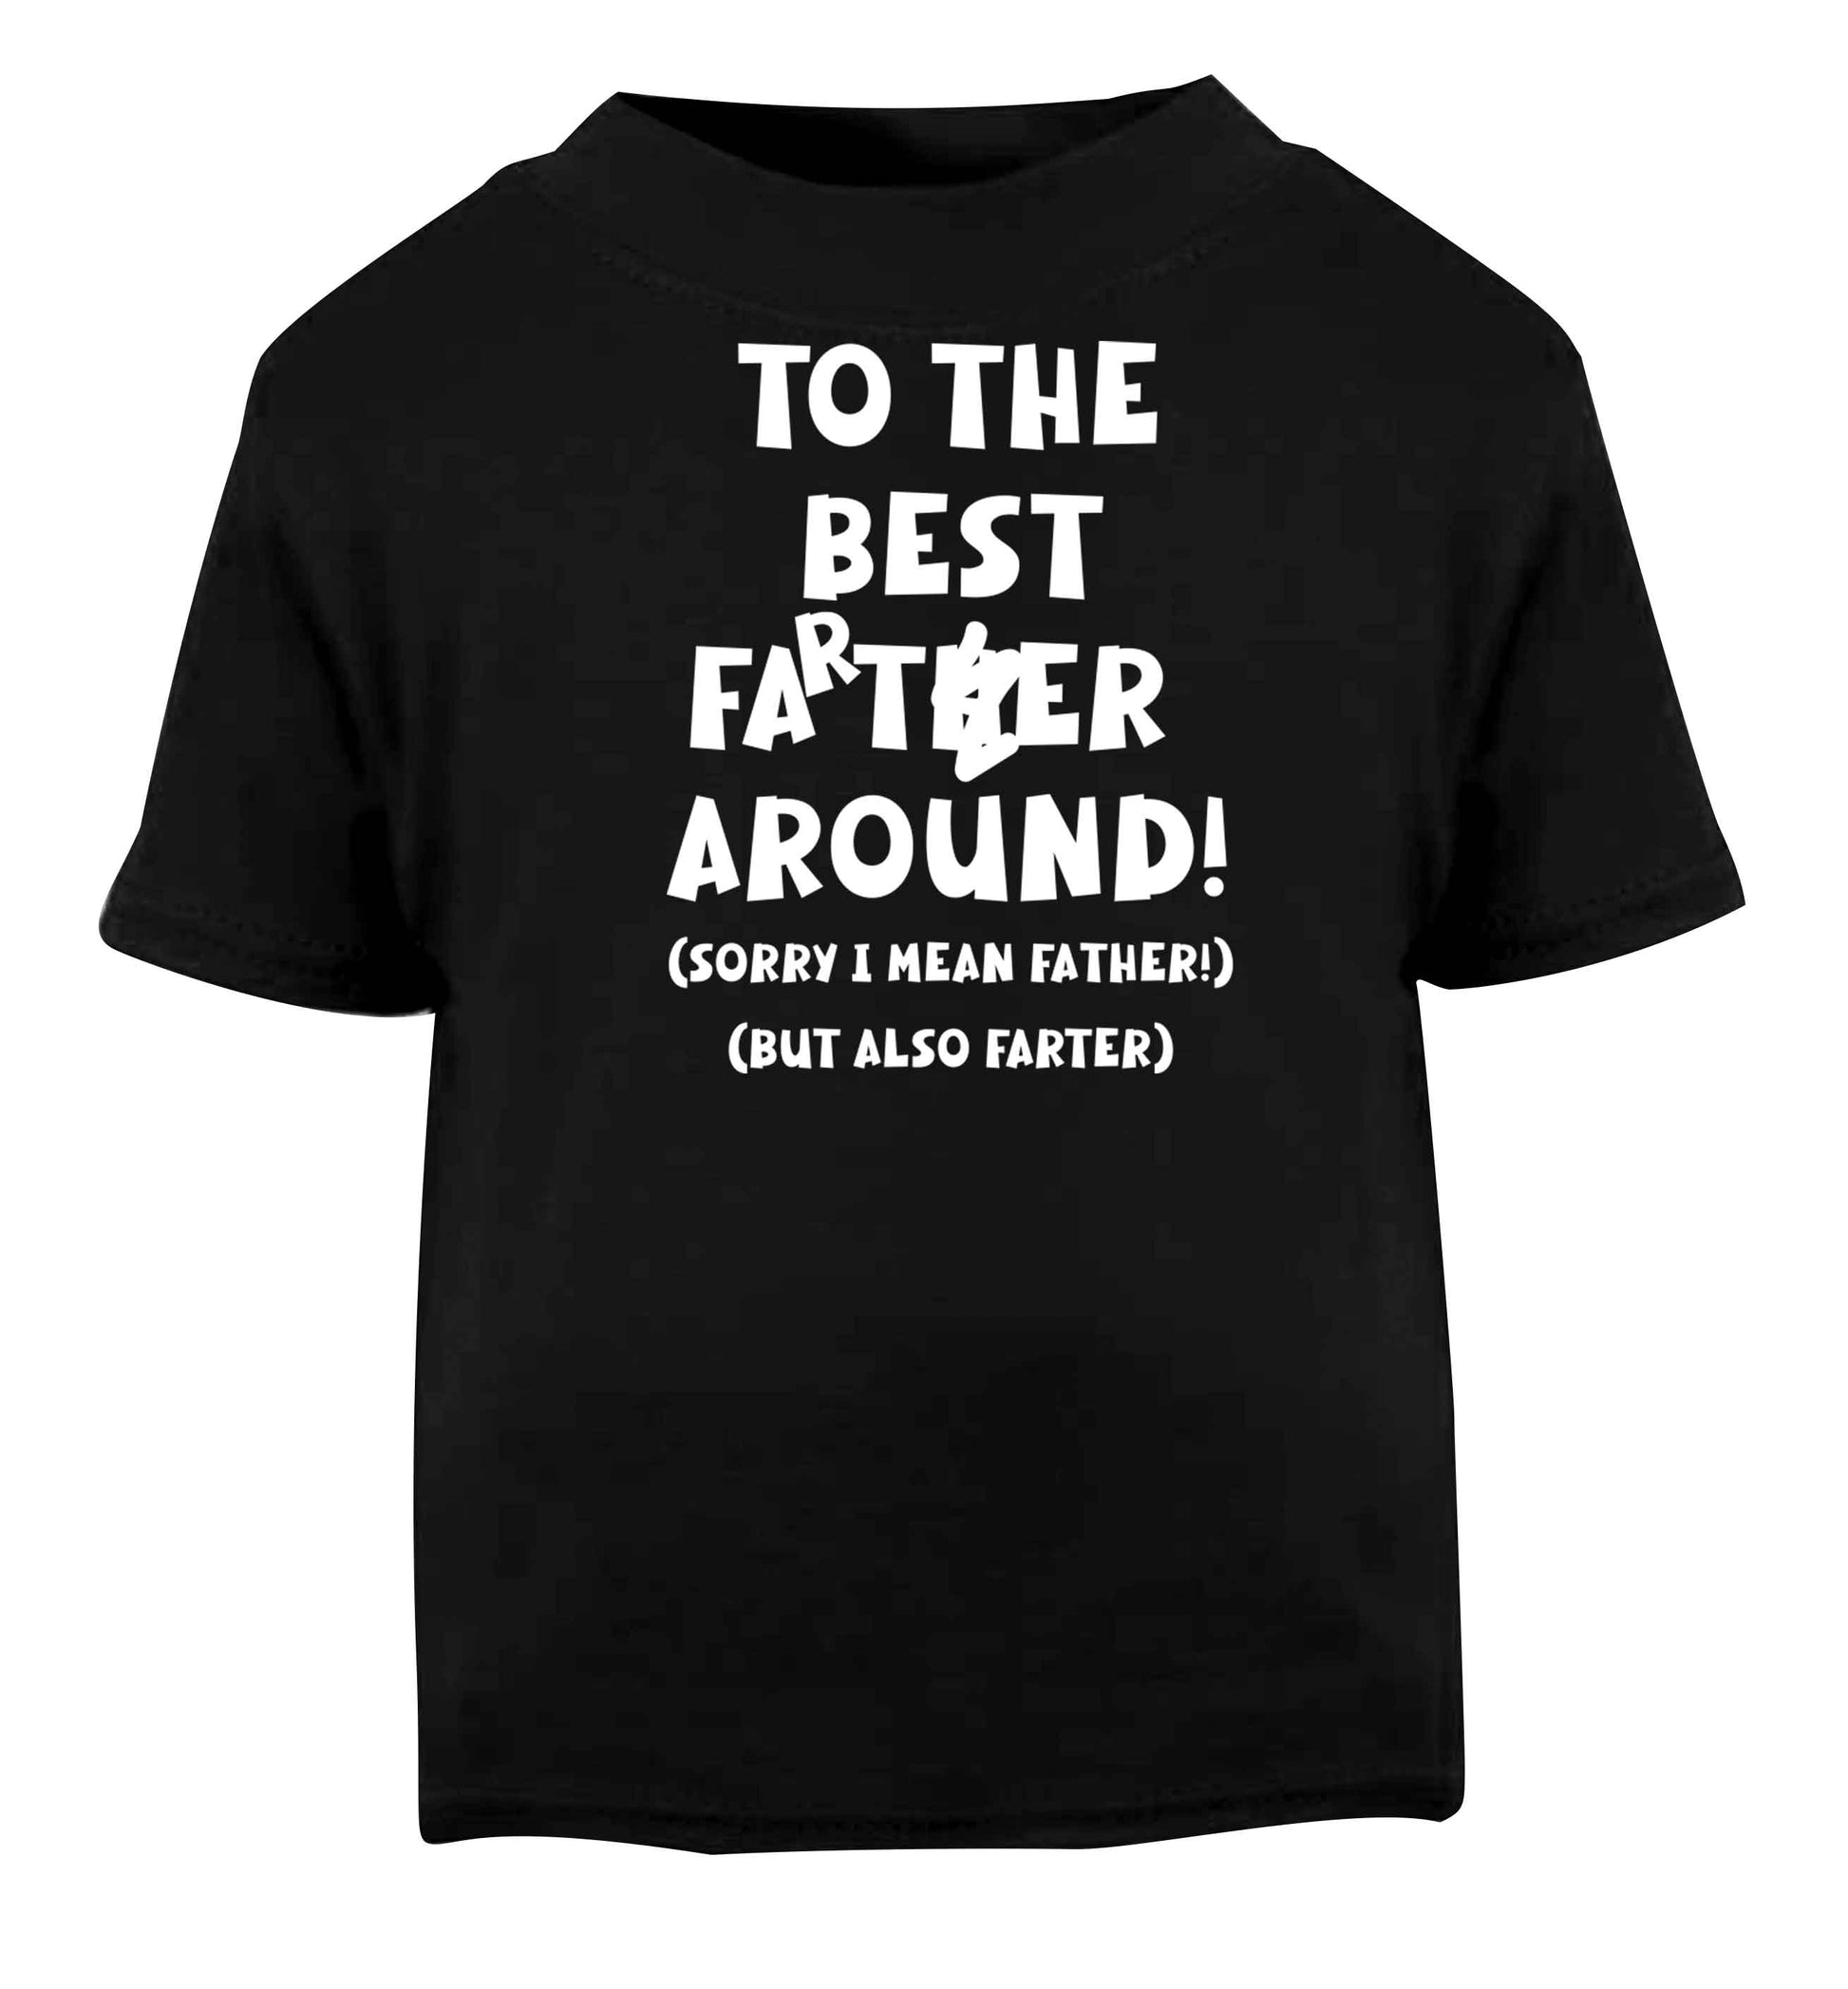 To the best farter around! Sorry I mean father, but also farter Black baby toddler Tshirt 2 years